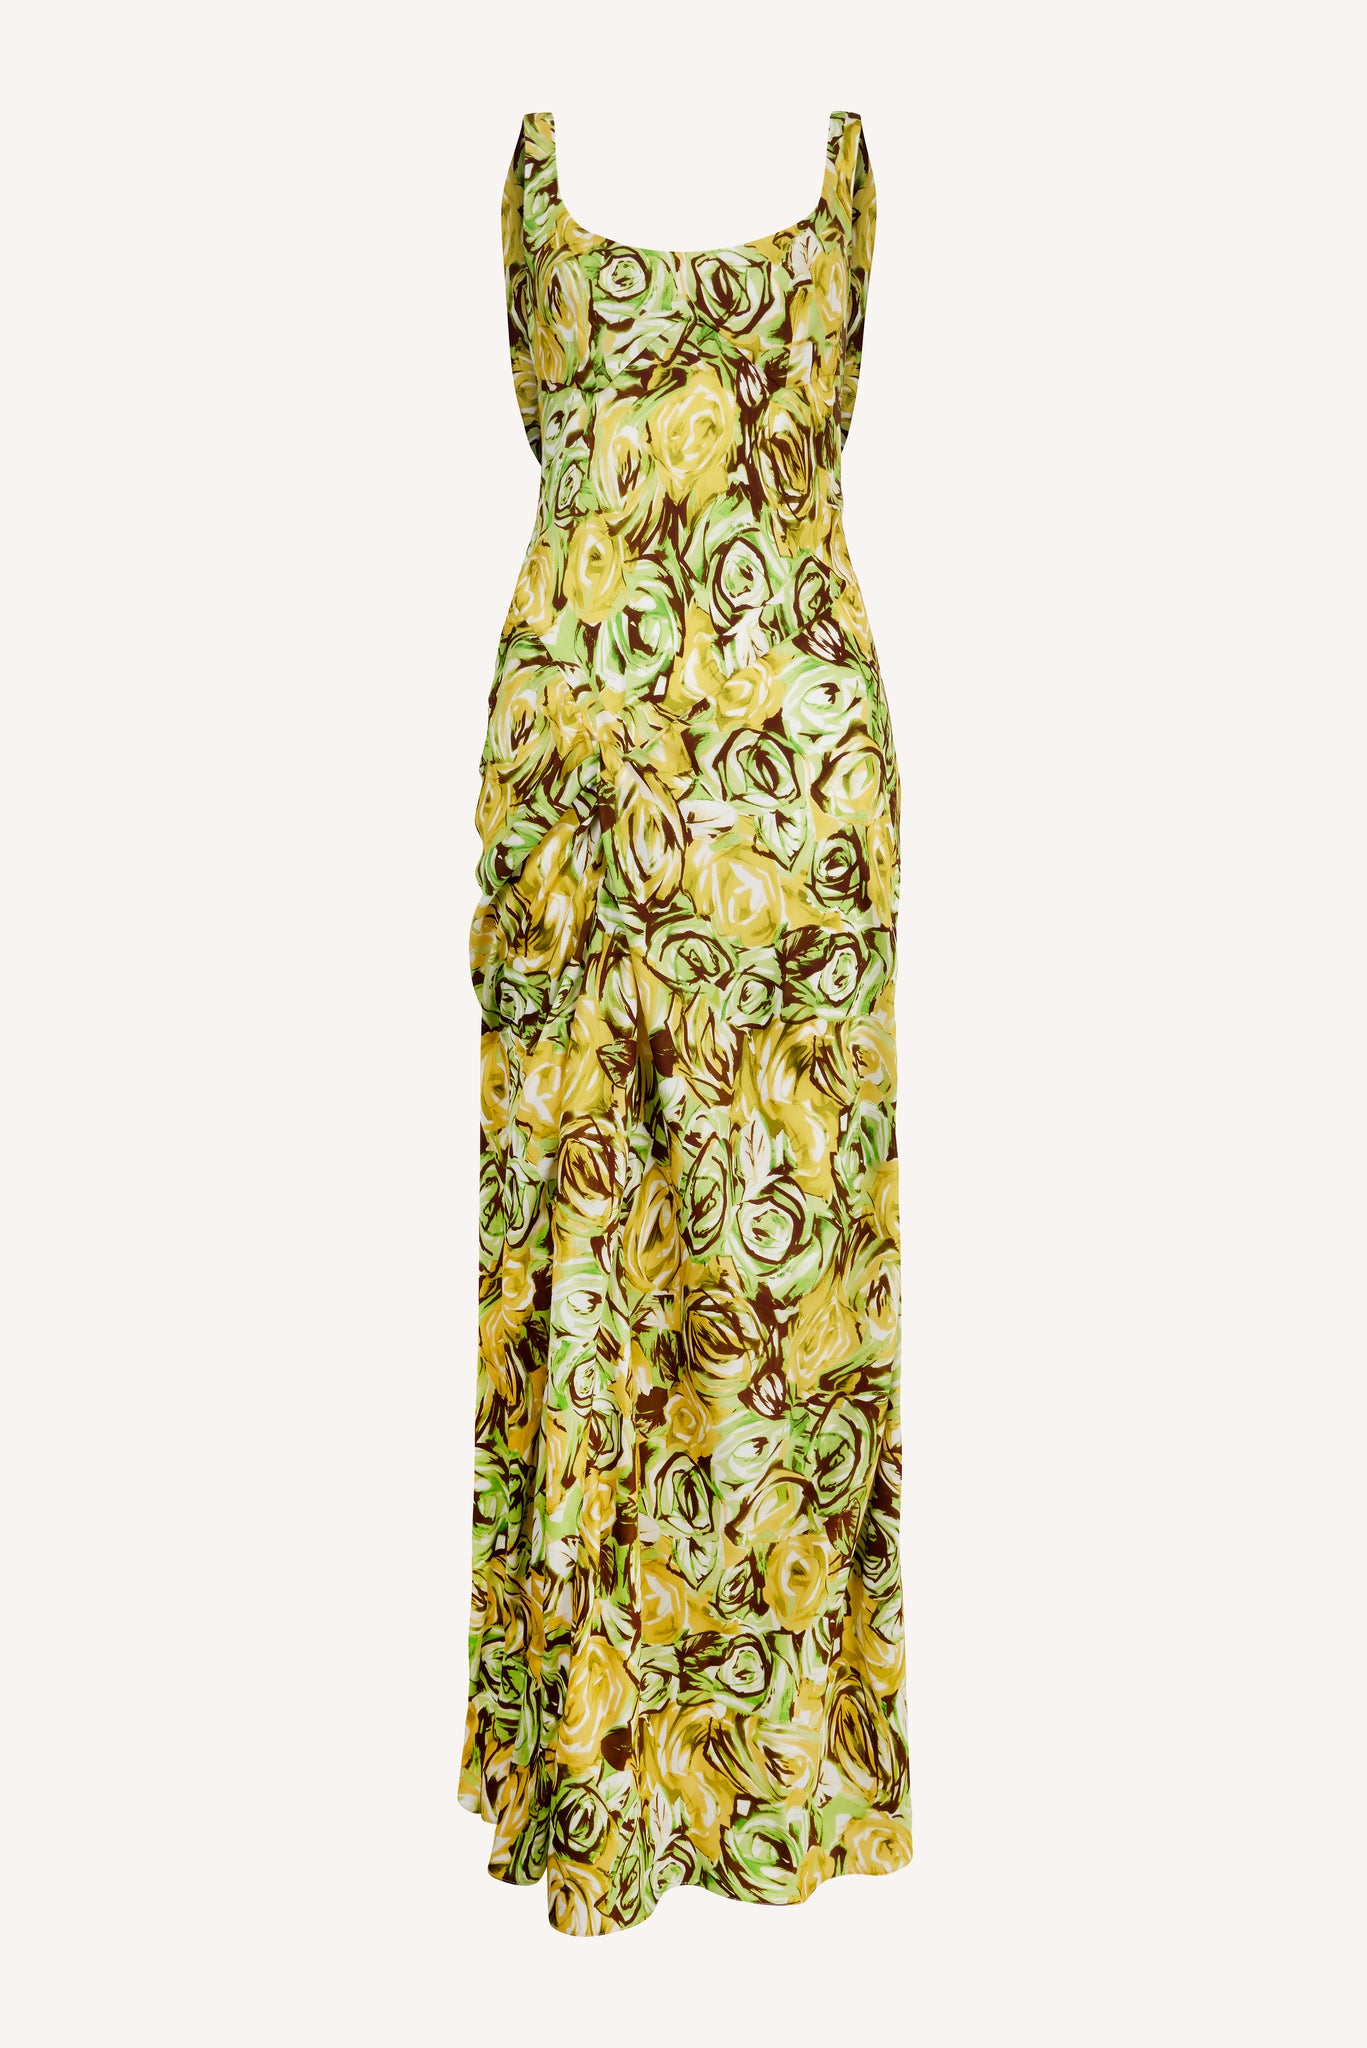 Barlow Dress In Abstract Green And Lemon Rose Printed Twill | Emilia Wickstead